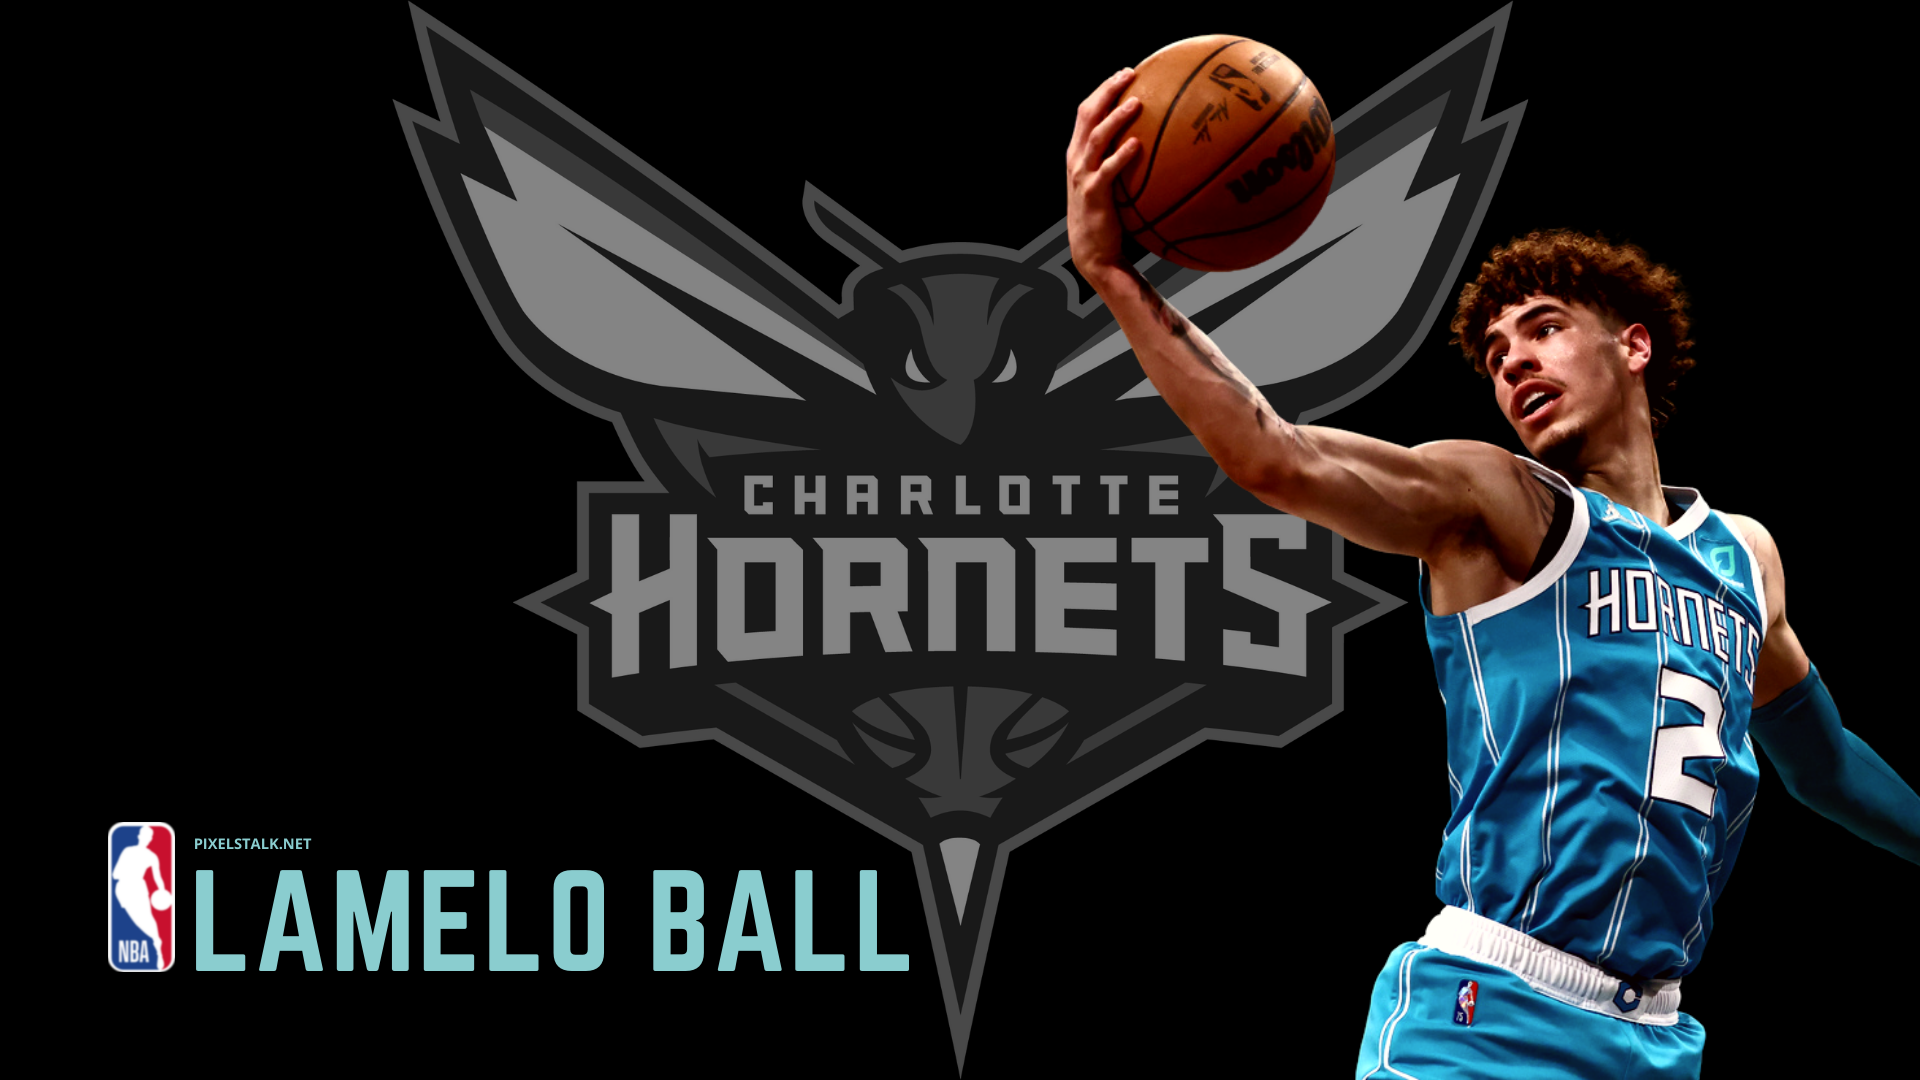 Charlotte Hornets auf Twitter Tonights Sprite Player of the Game is  MELOD1P RT to NBAAllStar VOTE for LAMELO BALL AllFly  httpstcokWd5AlMR7k  Twitter